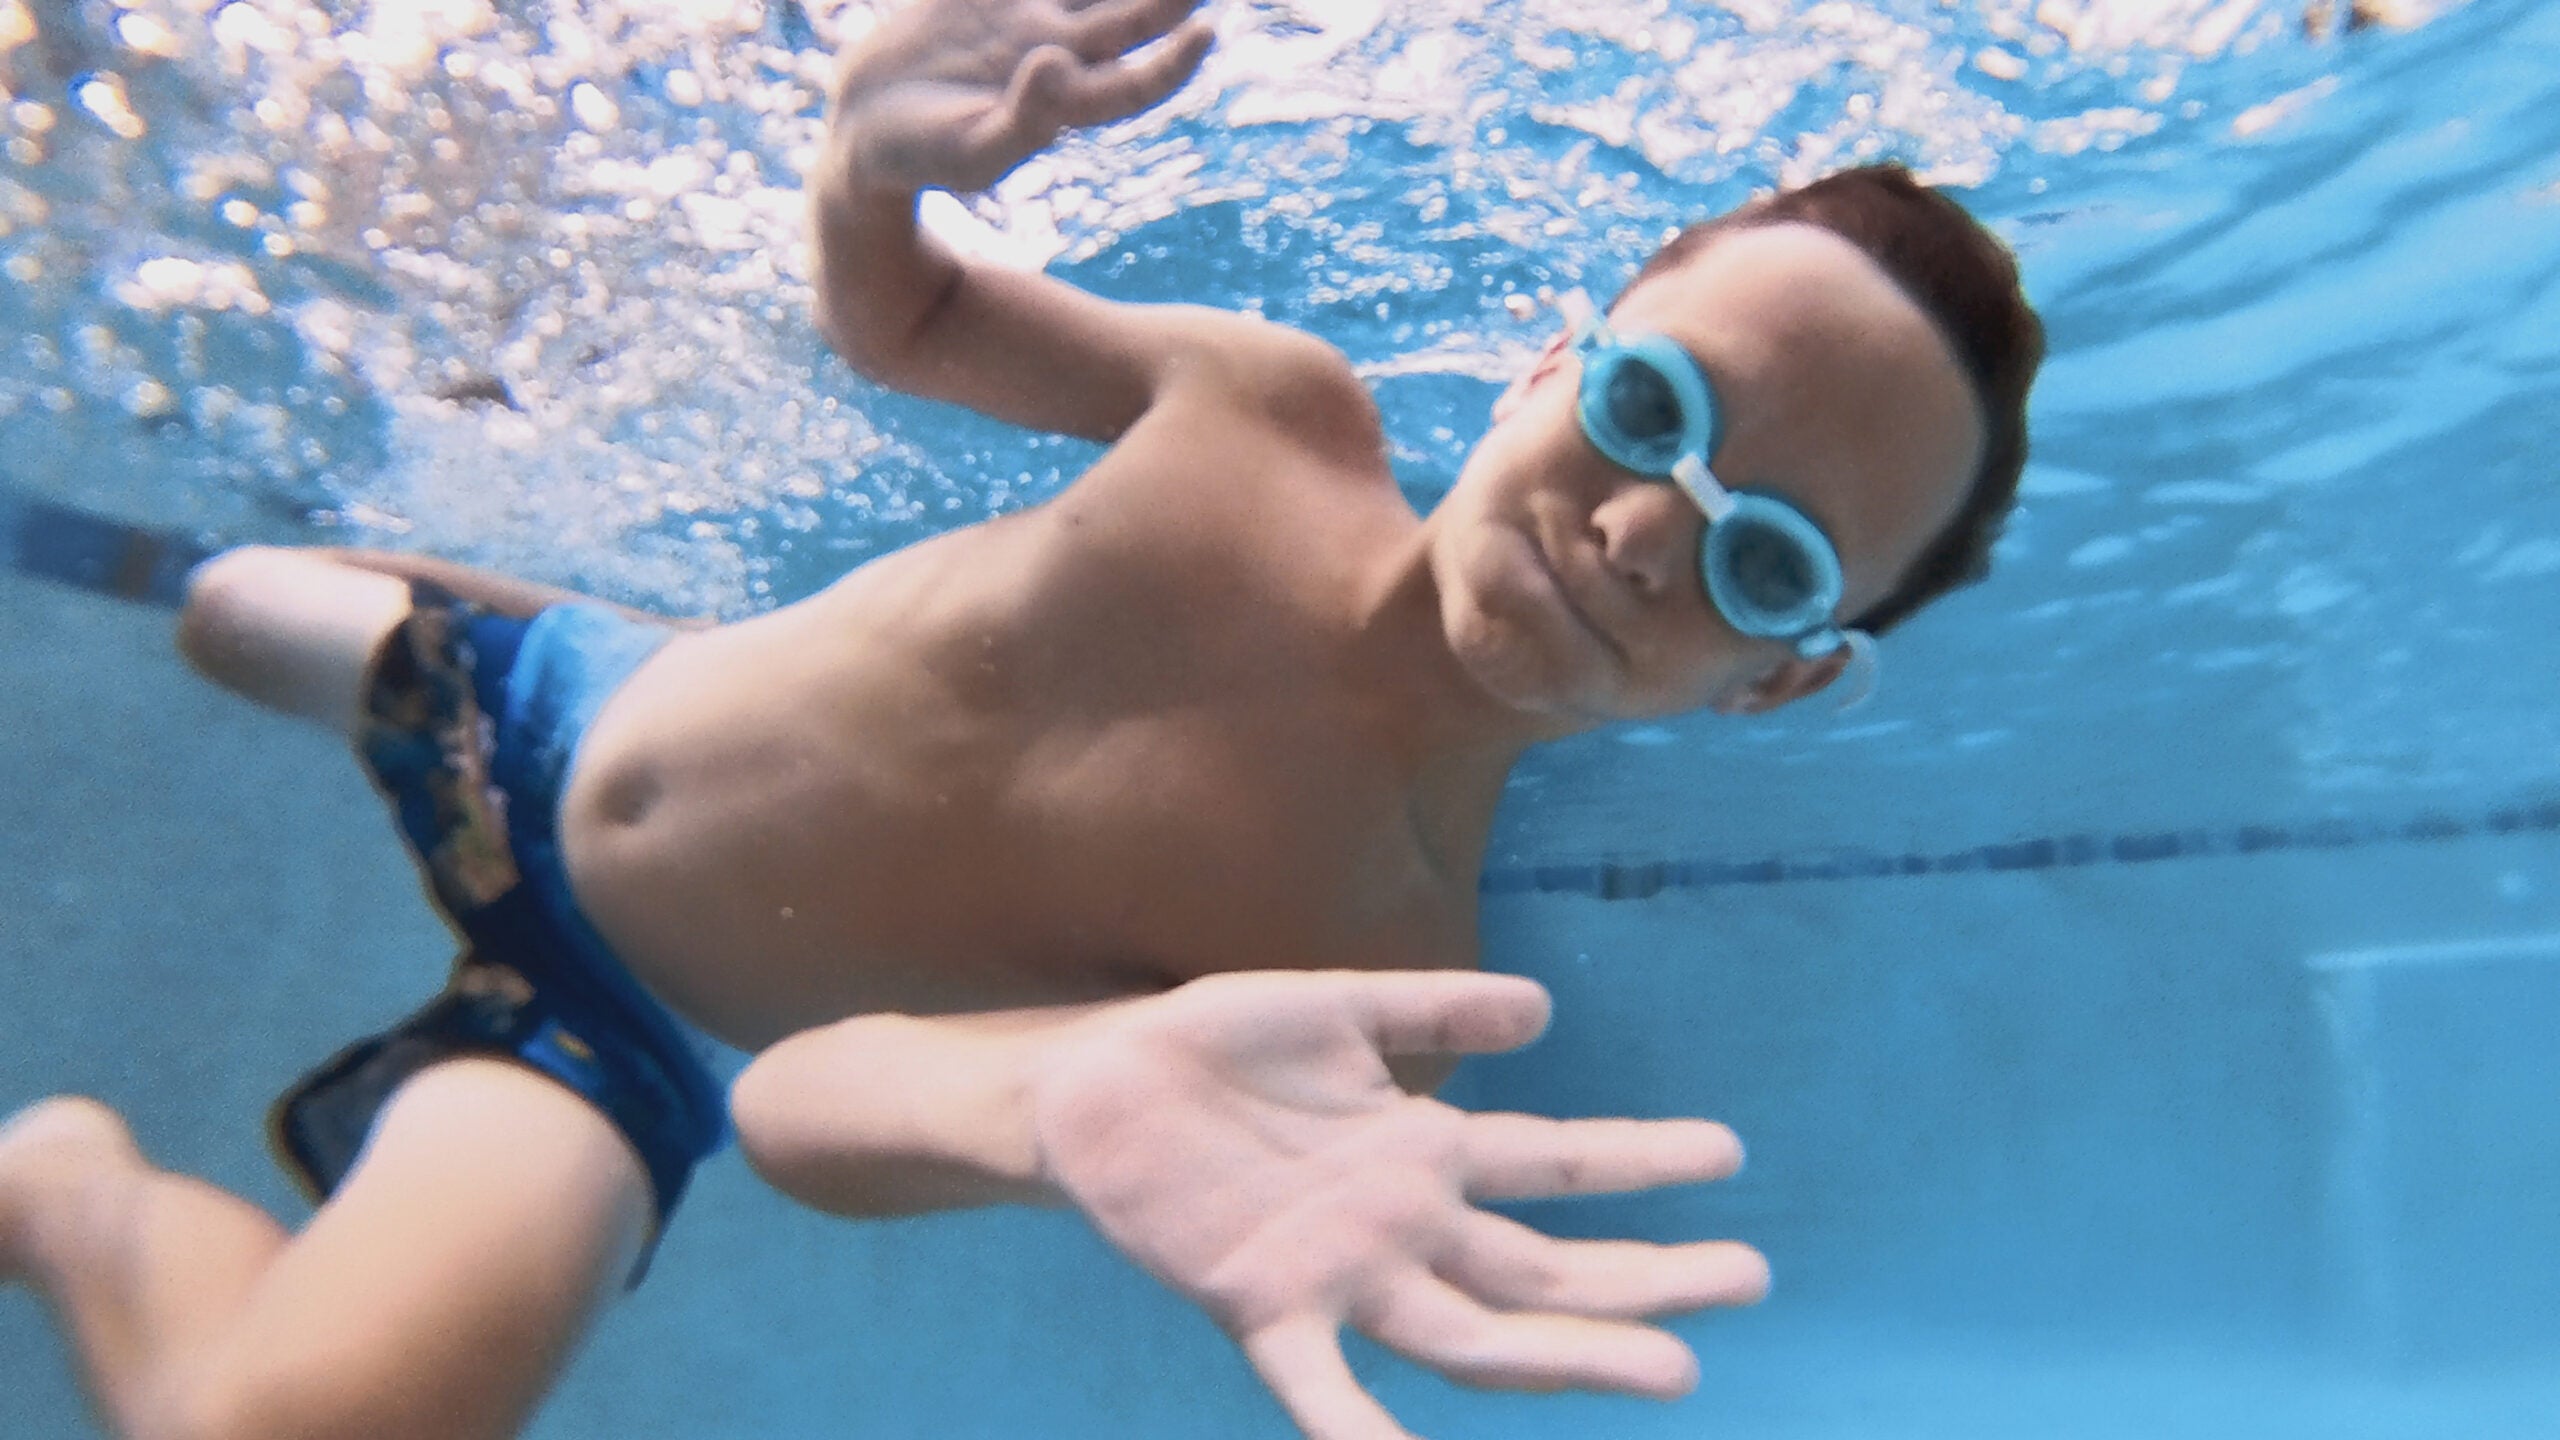 a kid swims underwater with goggles on, waving to the camera